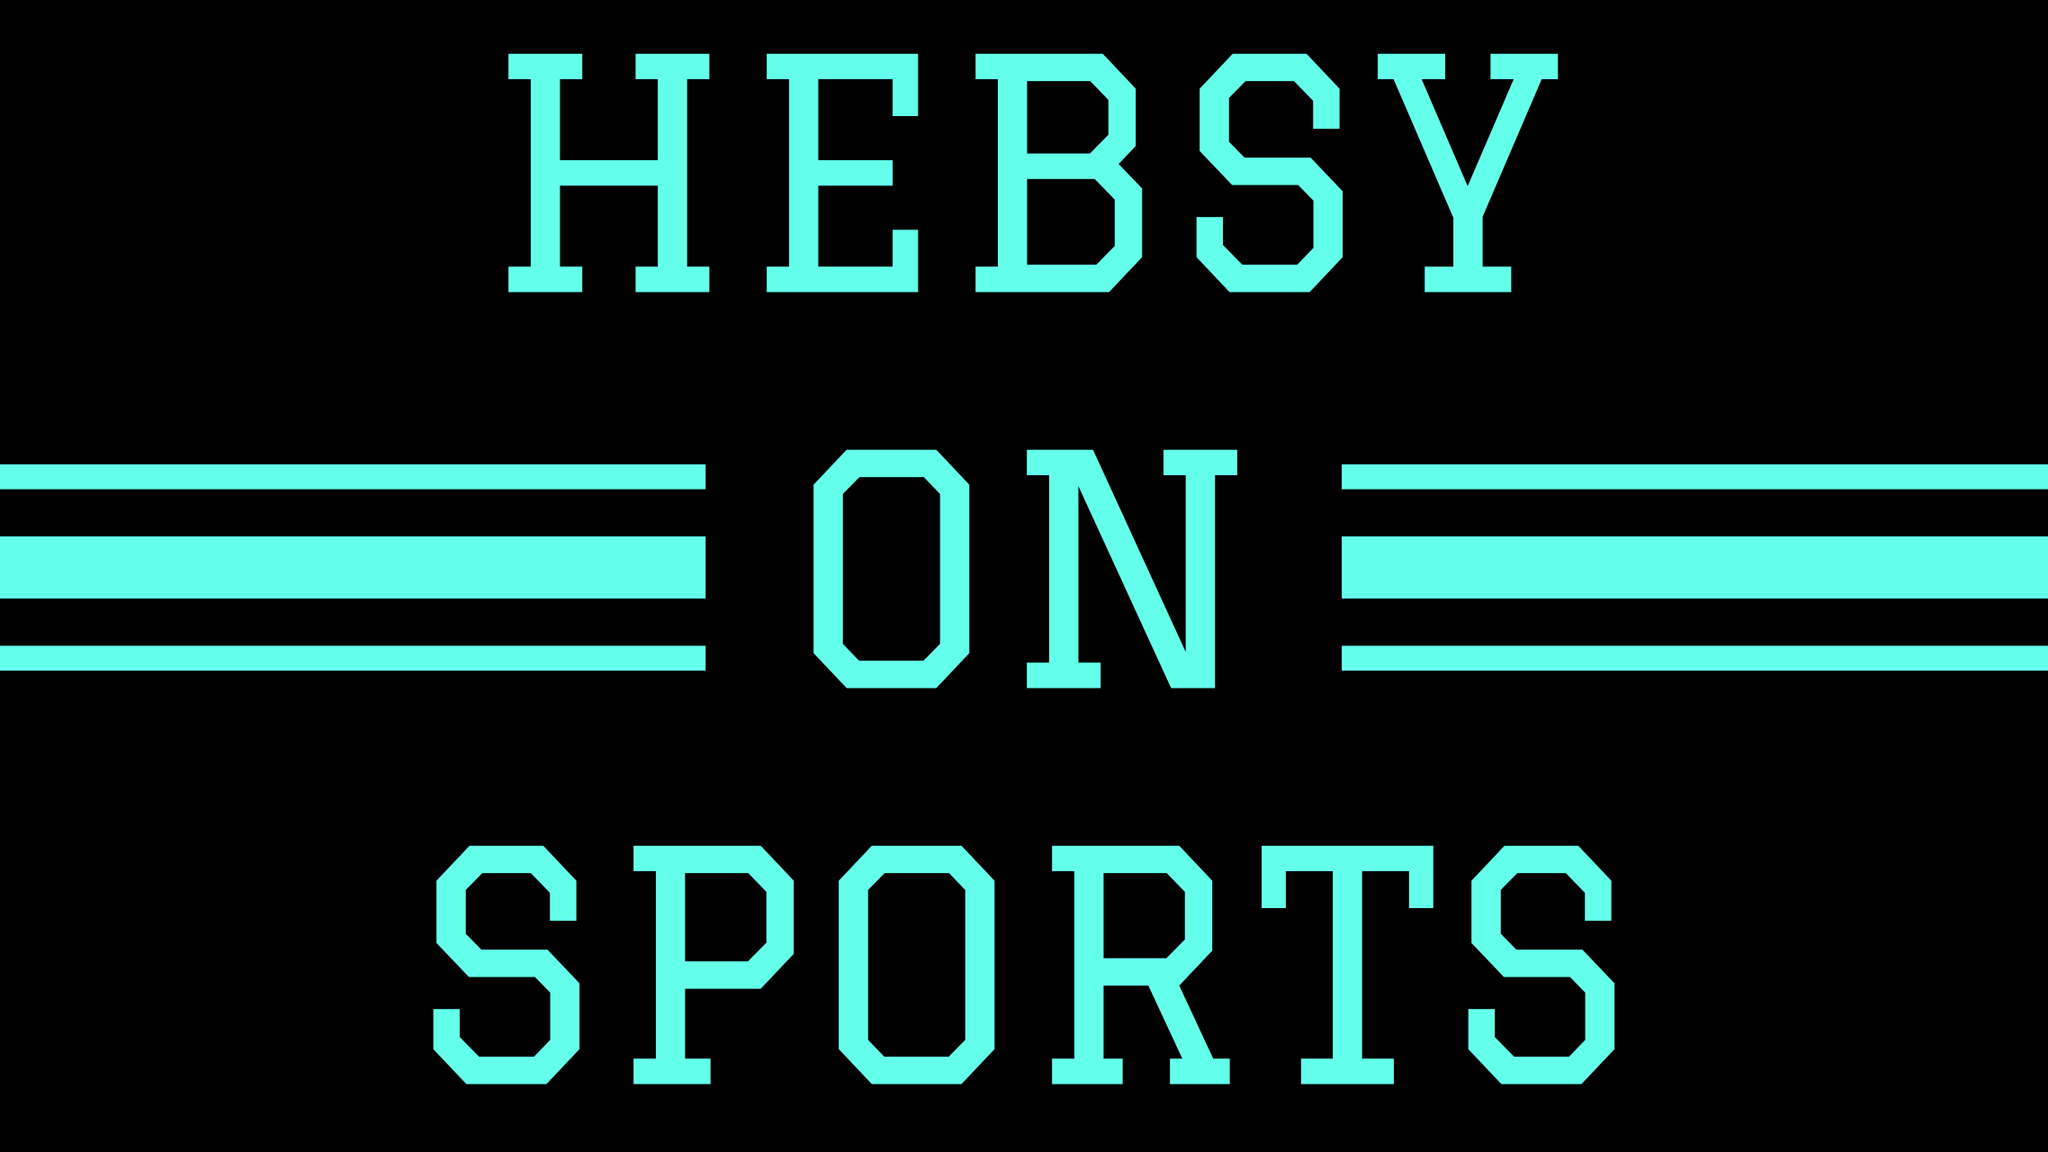 Hebsy on Sports for August 13, 2021